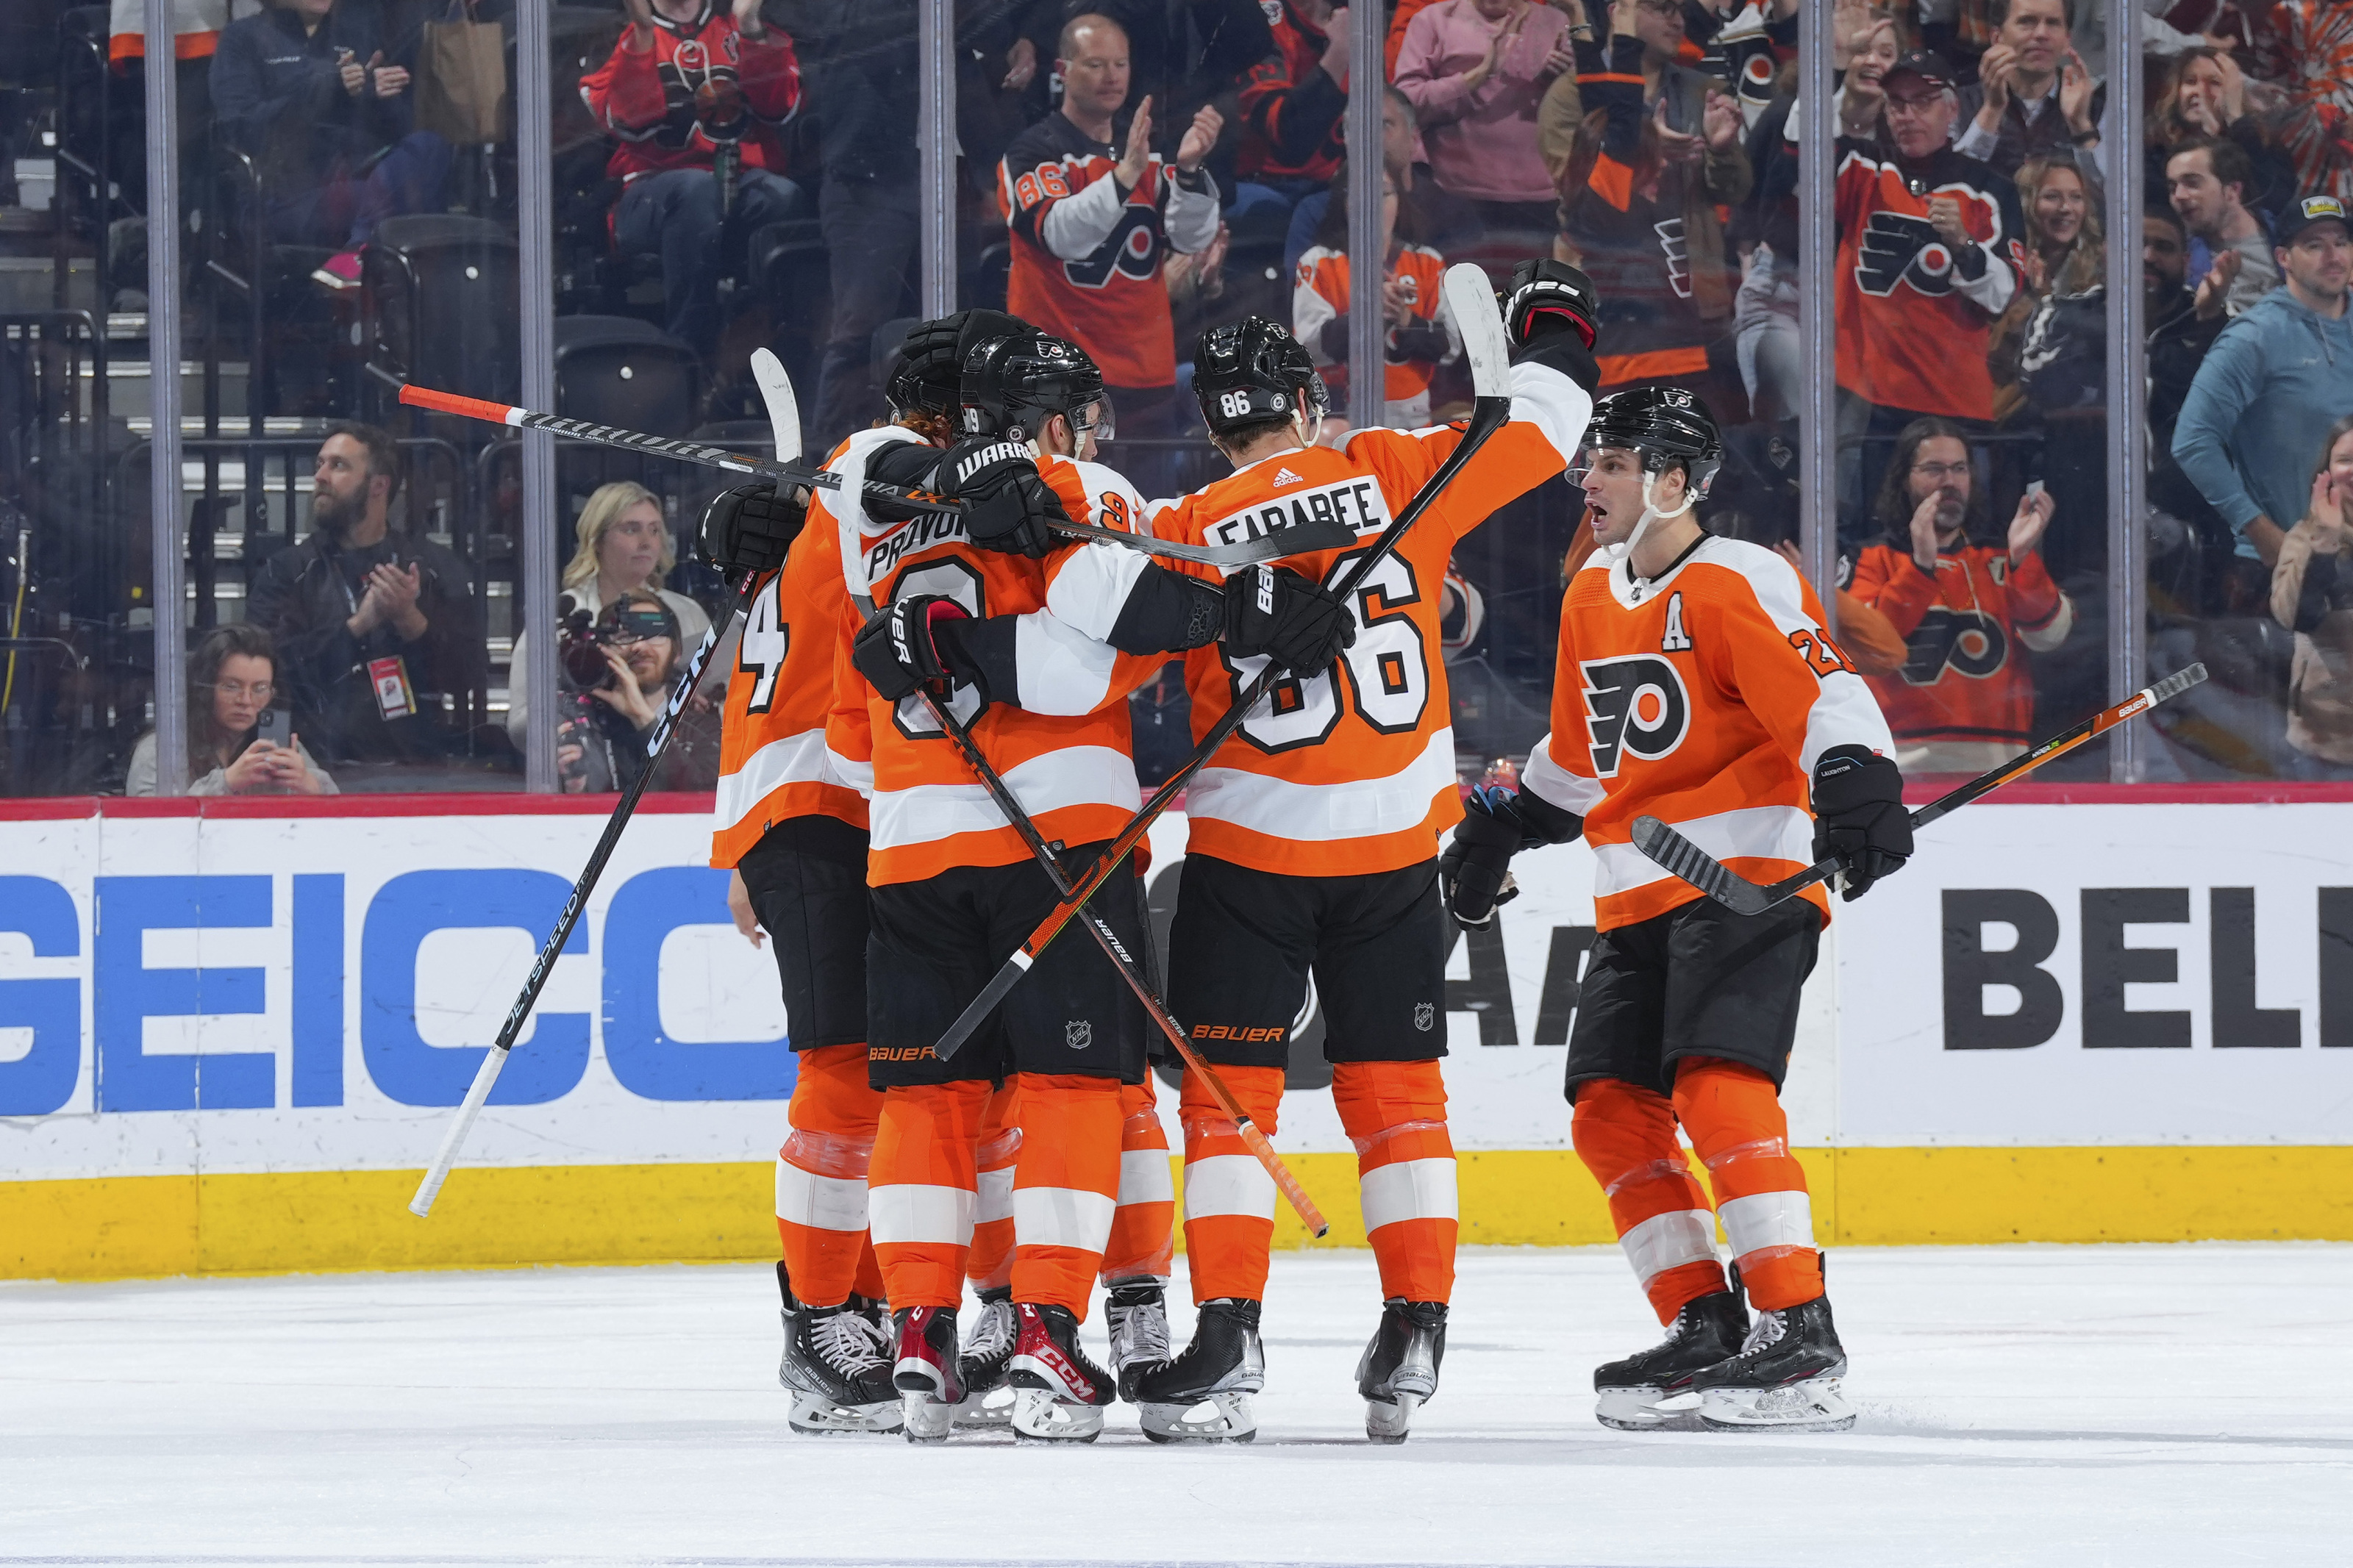 Top 10 Flyers Games to Watch This Hockey Season - Flyers Nation